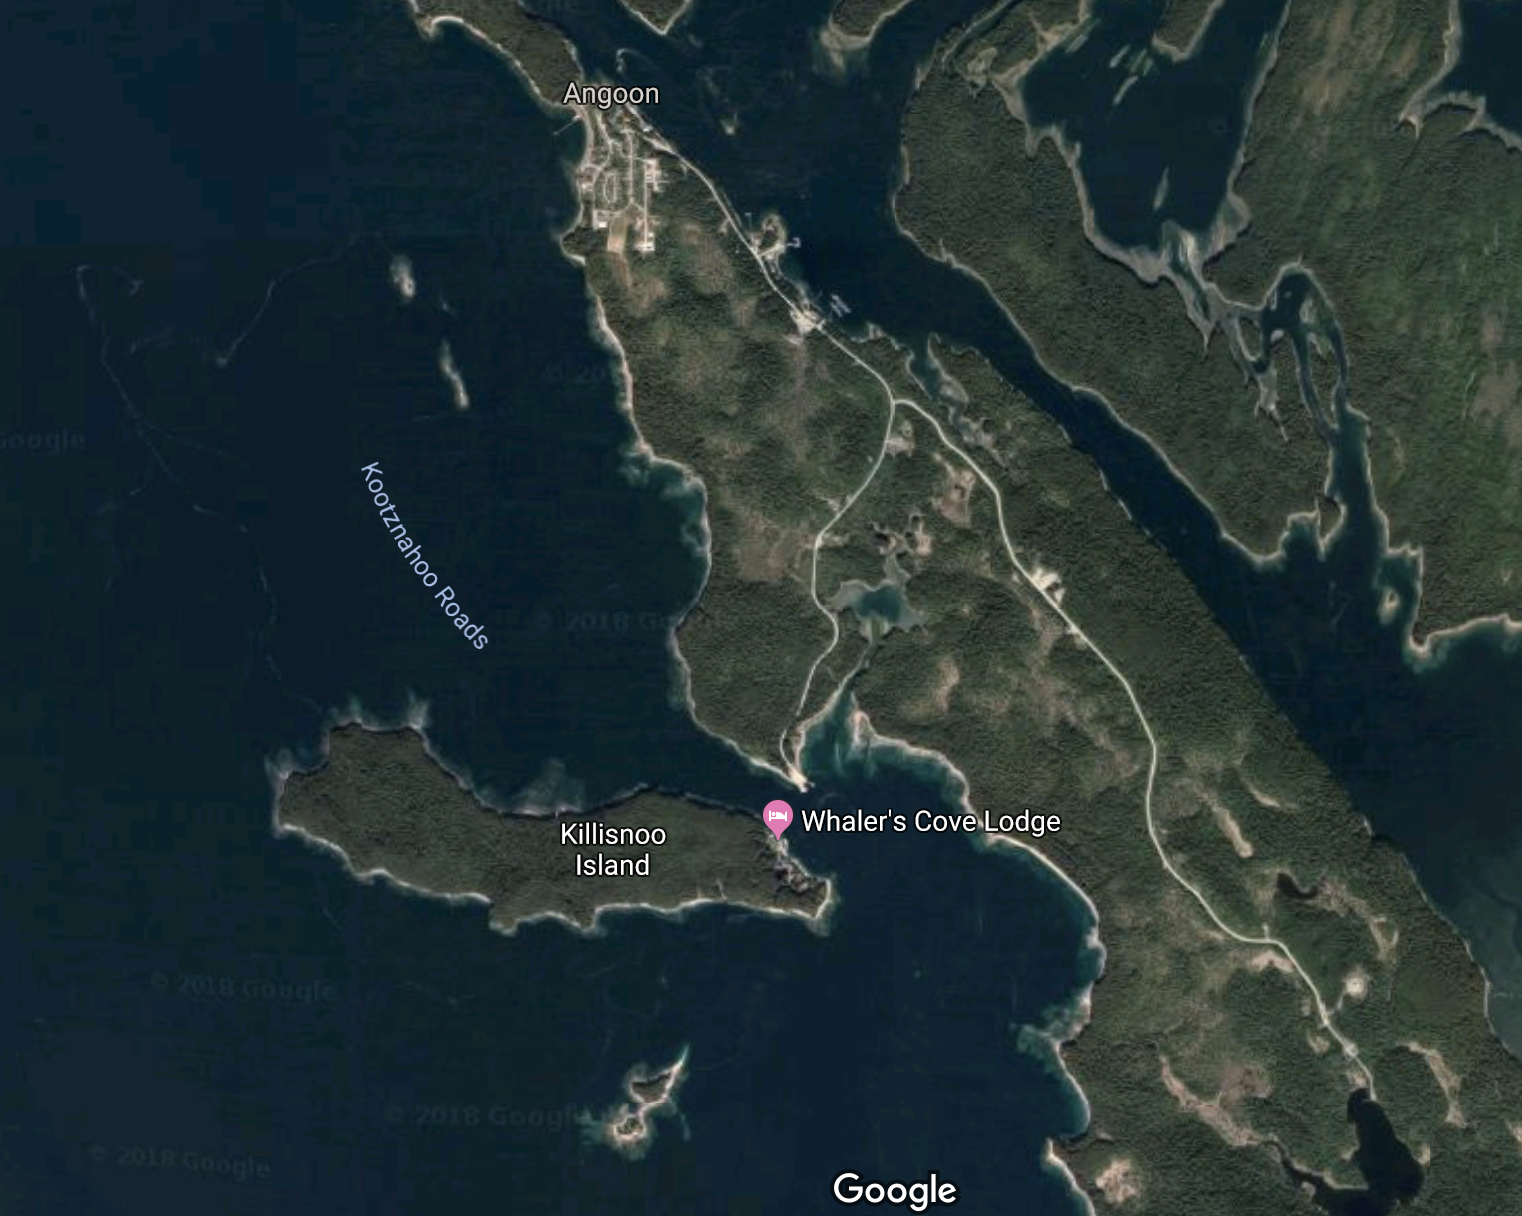 Google map of Angoon and Killisnoo Island, showing the settlements at night surrounded by woods and water